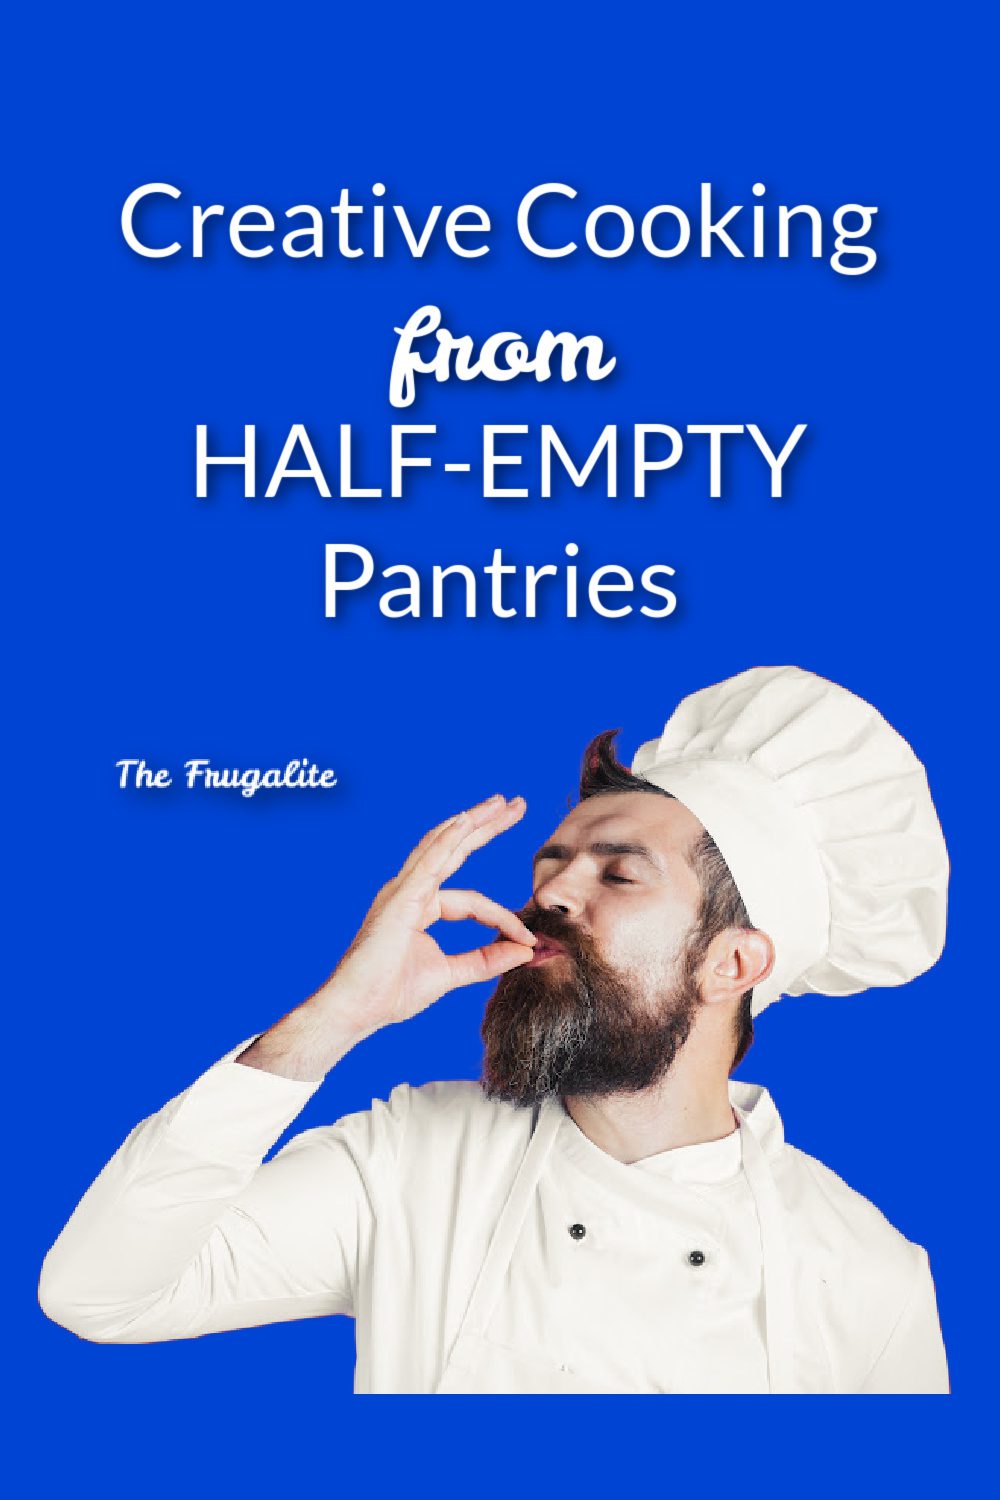 Creative Cooking from Half-Empty Pantries